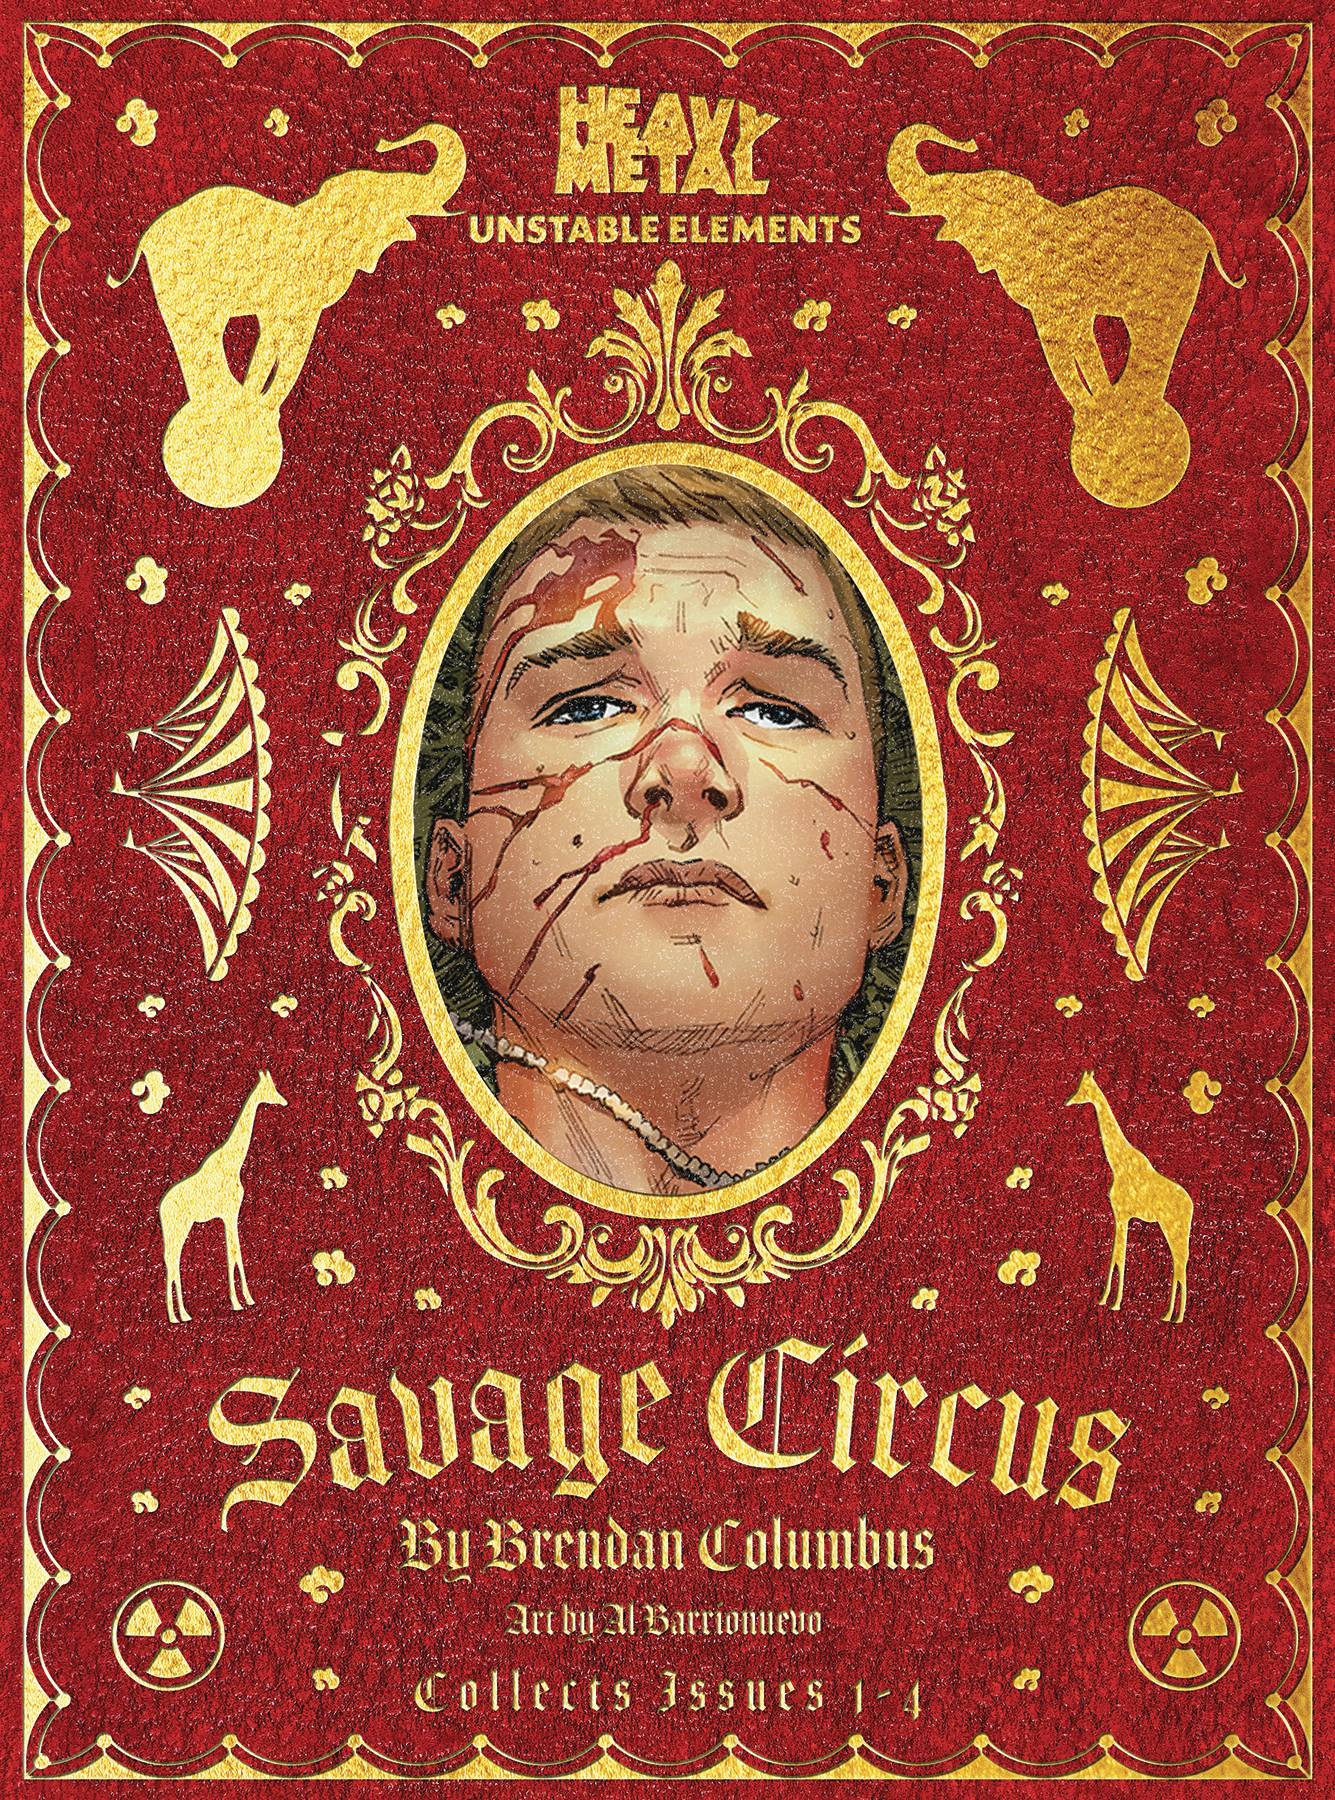 SAVAGE CIRCUS UNSTABLE ELEMENTS ONE SHOT